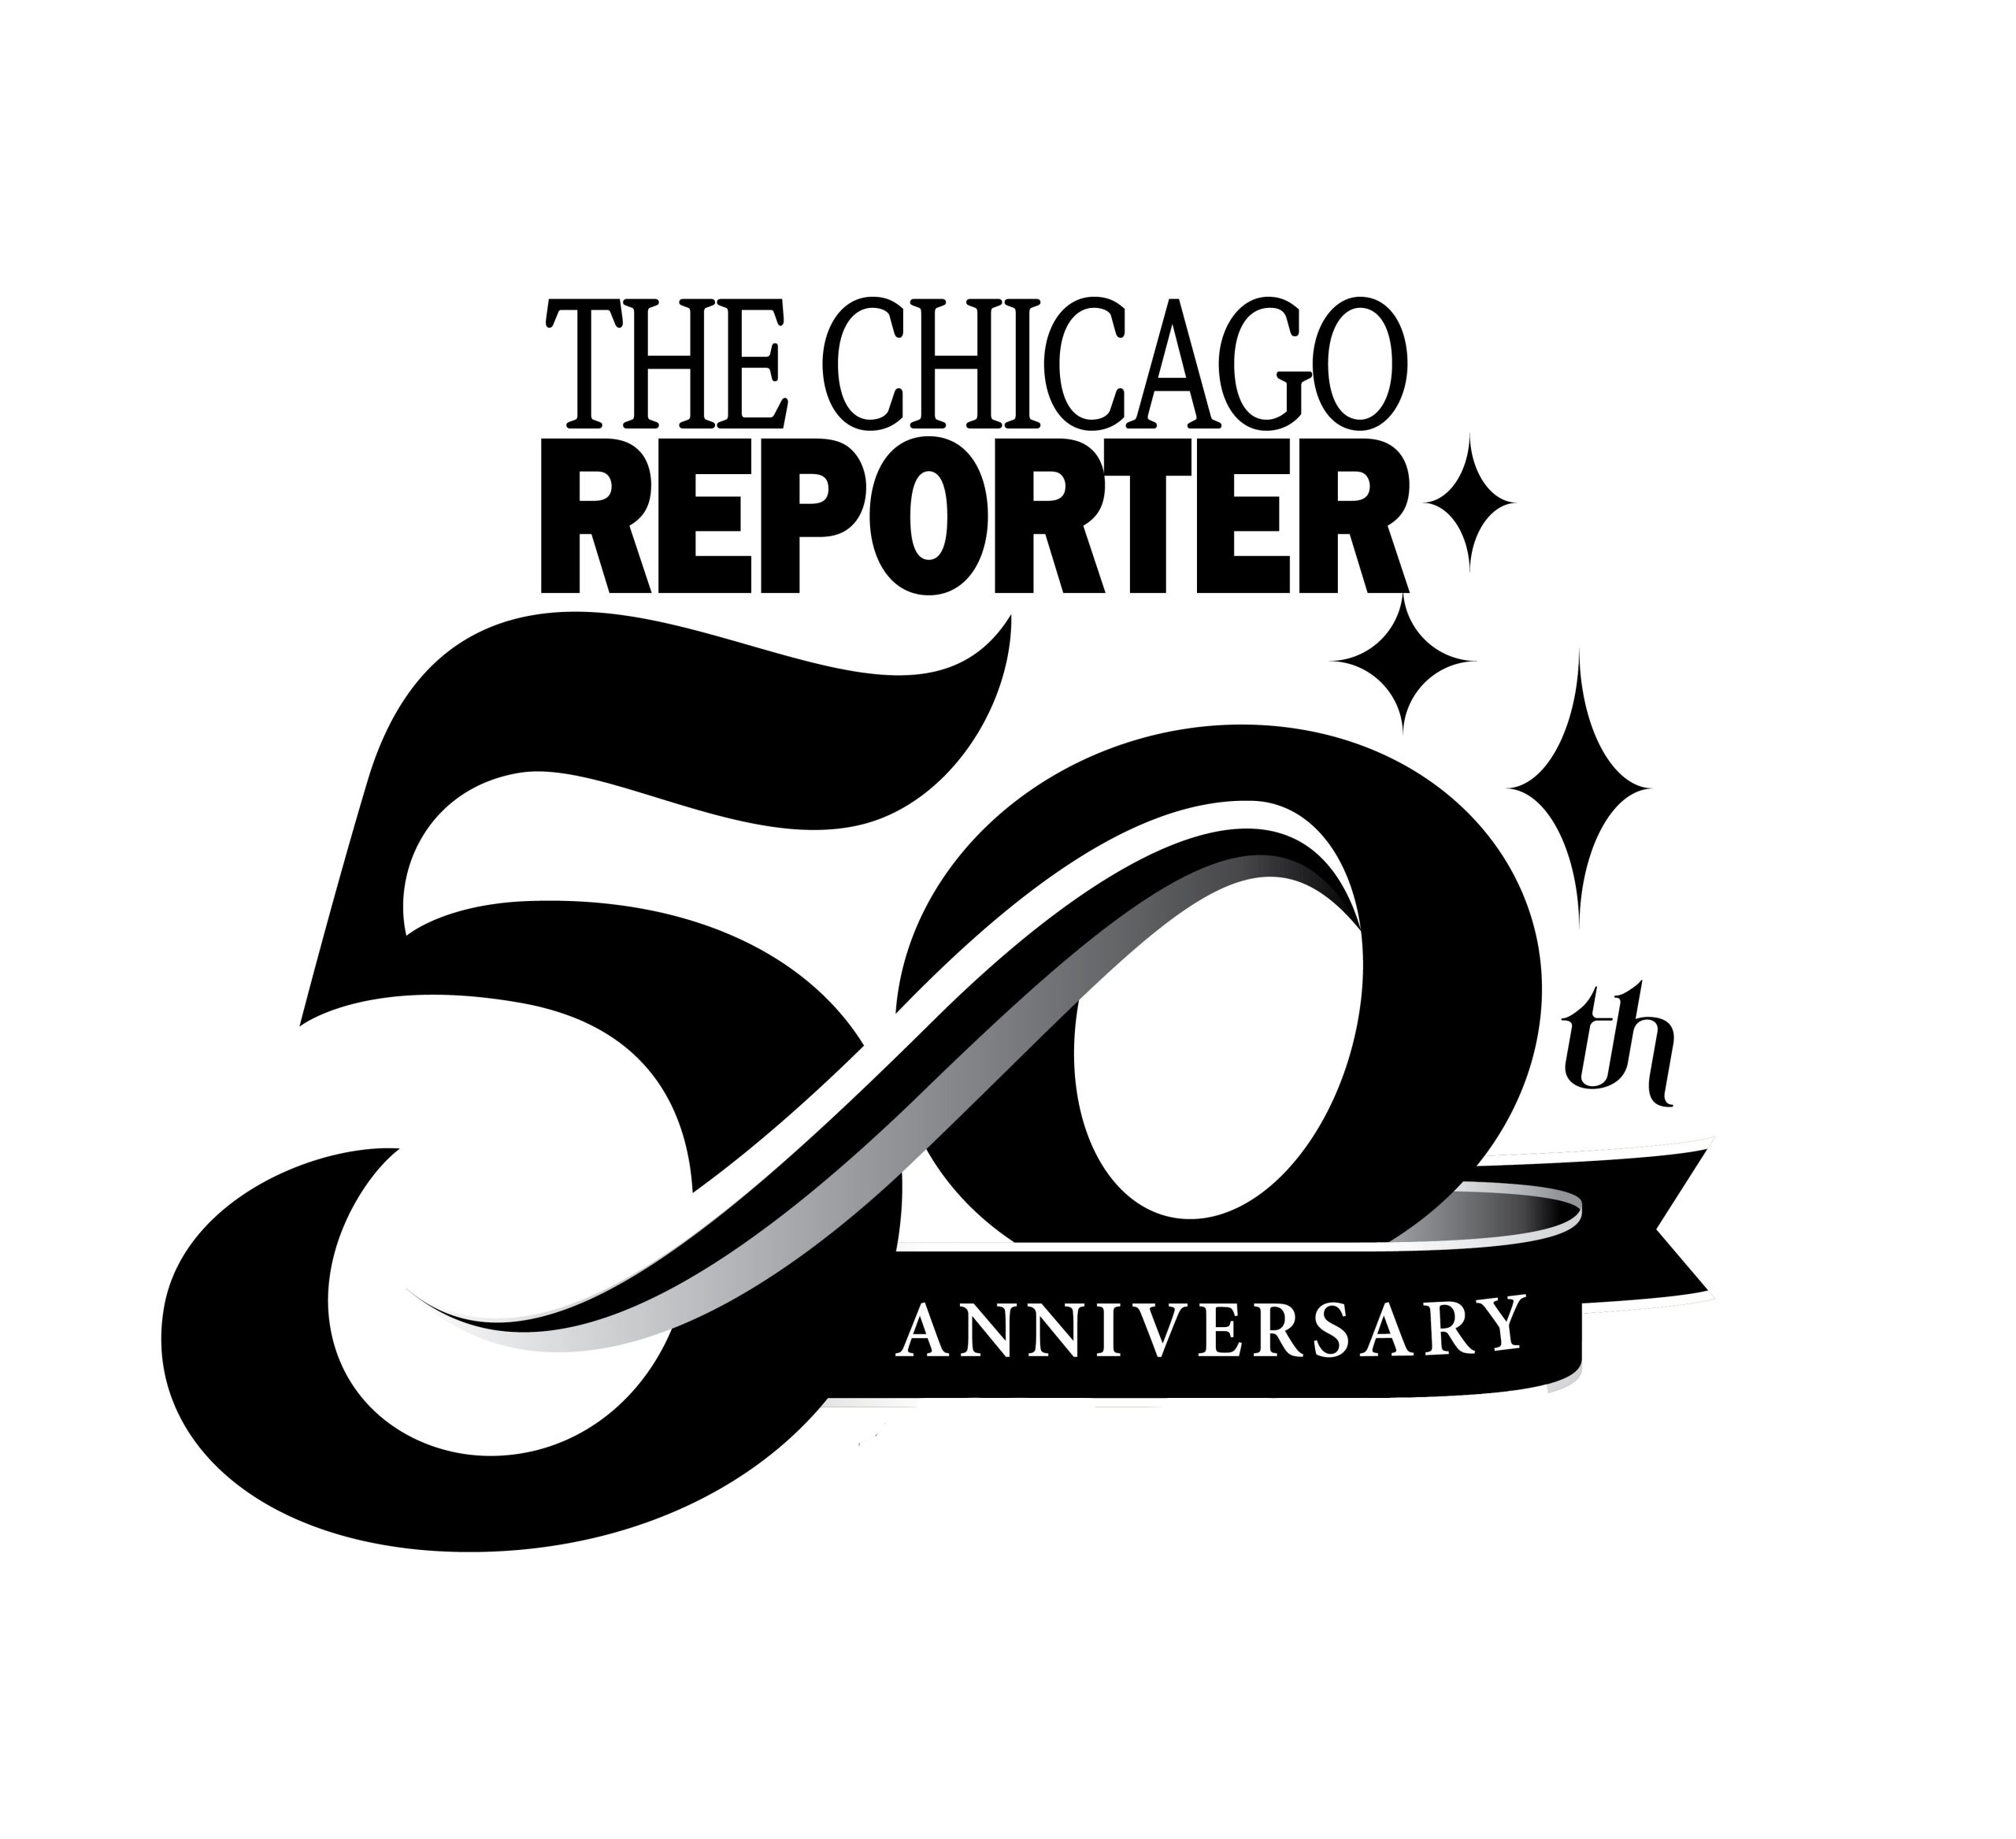 The Chicago Reporter